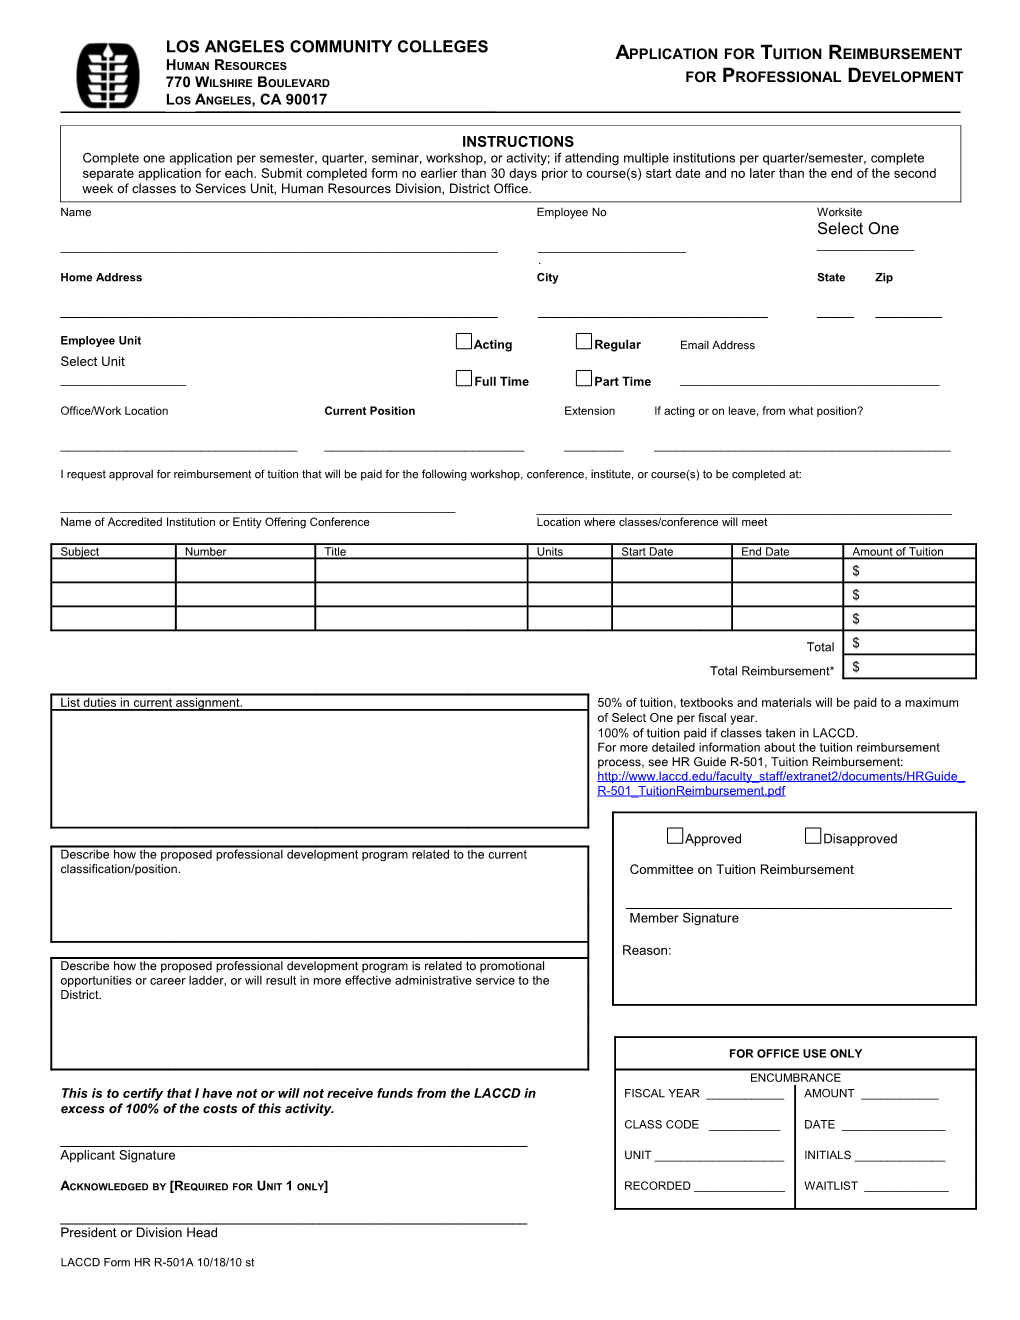 LACCD Form HR R-501A 10/18/10 St